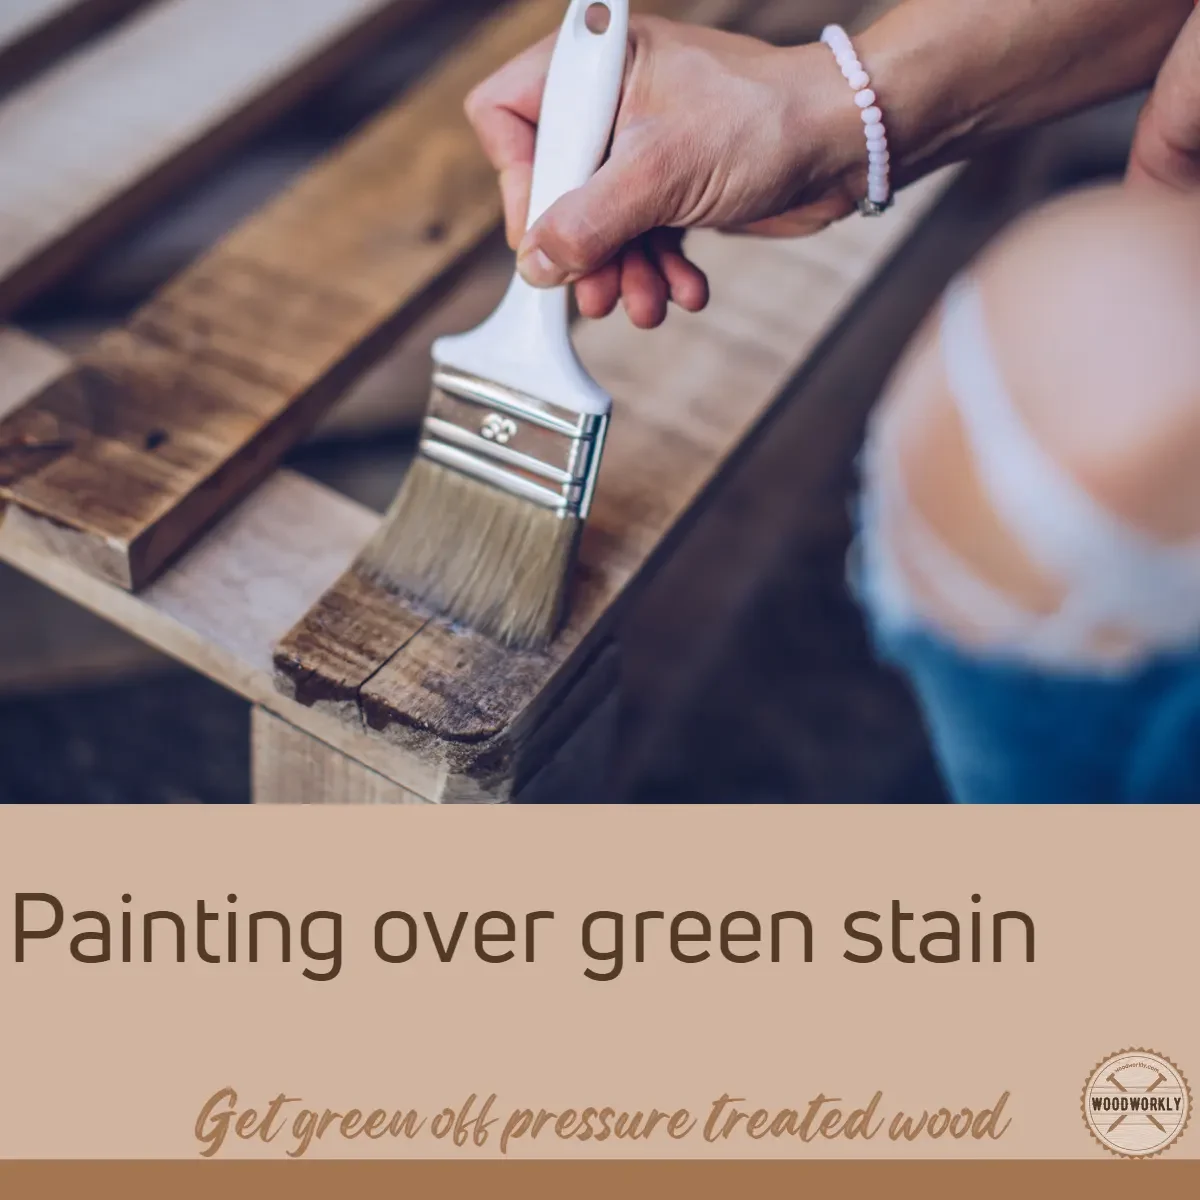 Painting over green stain on pressure treated wood